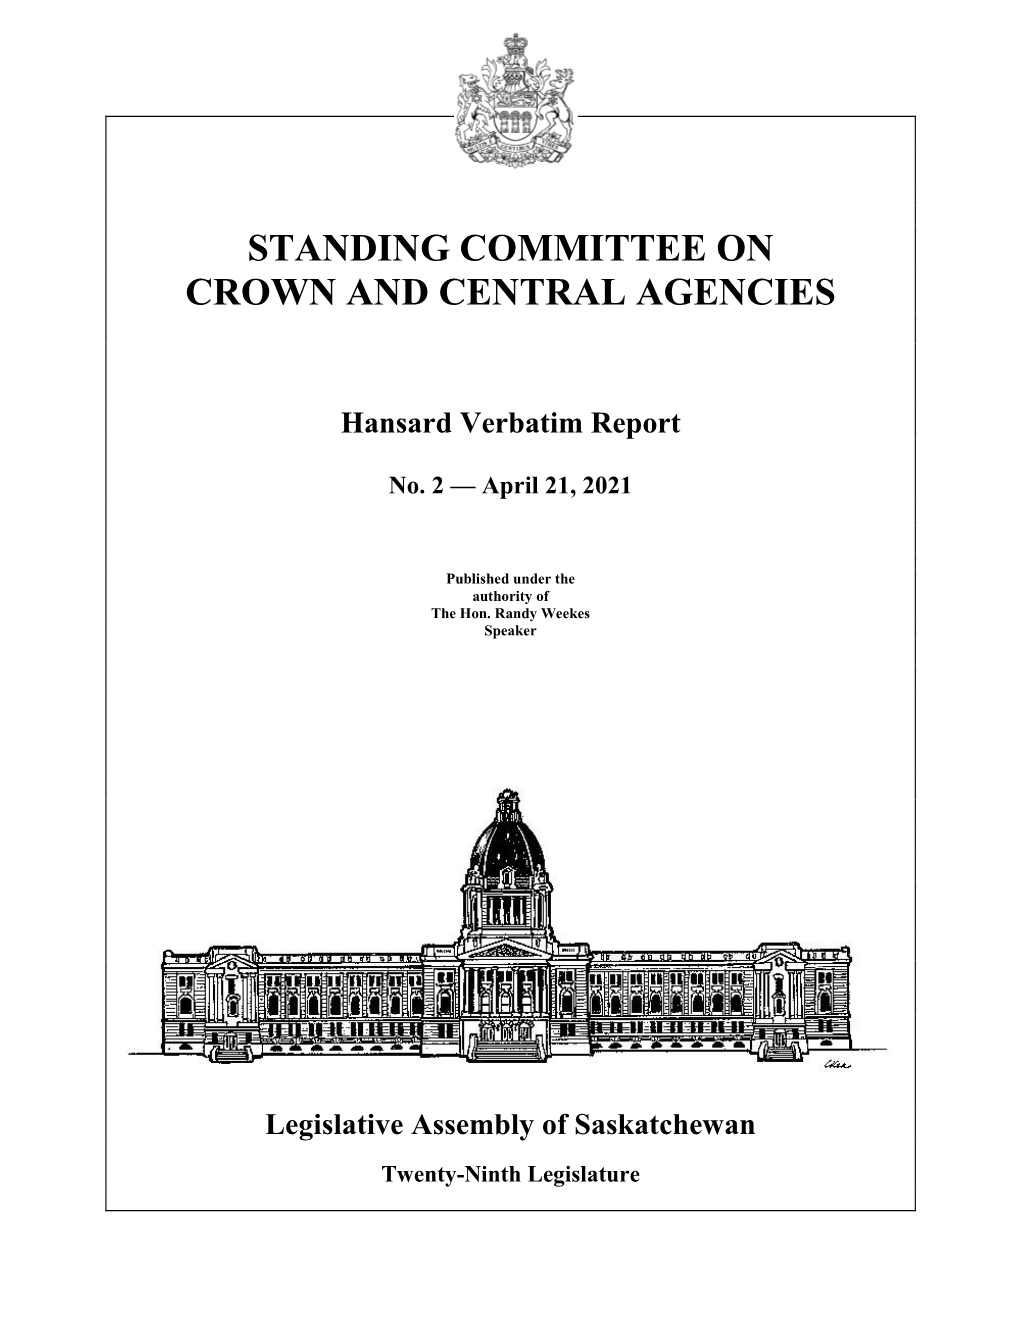 April 21, 2021 Crown and Central Agencies Committee 5